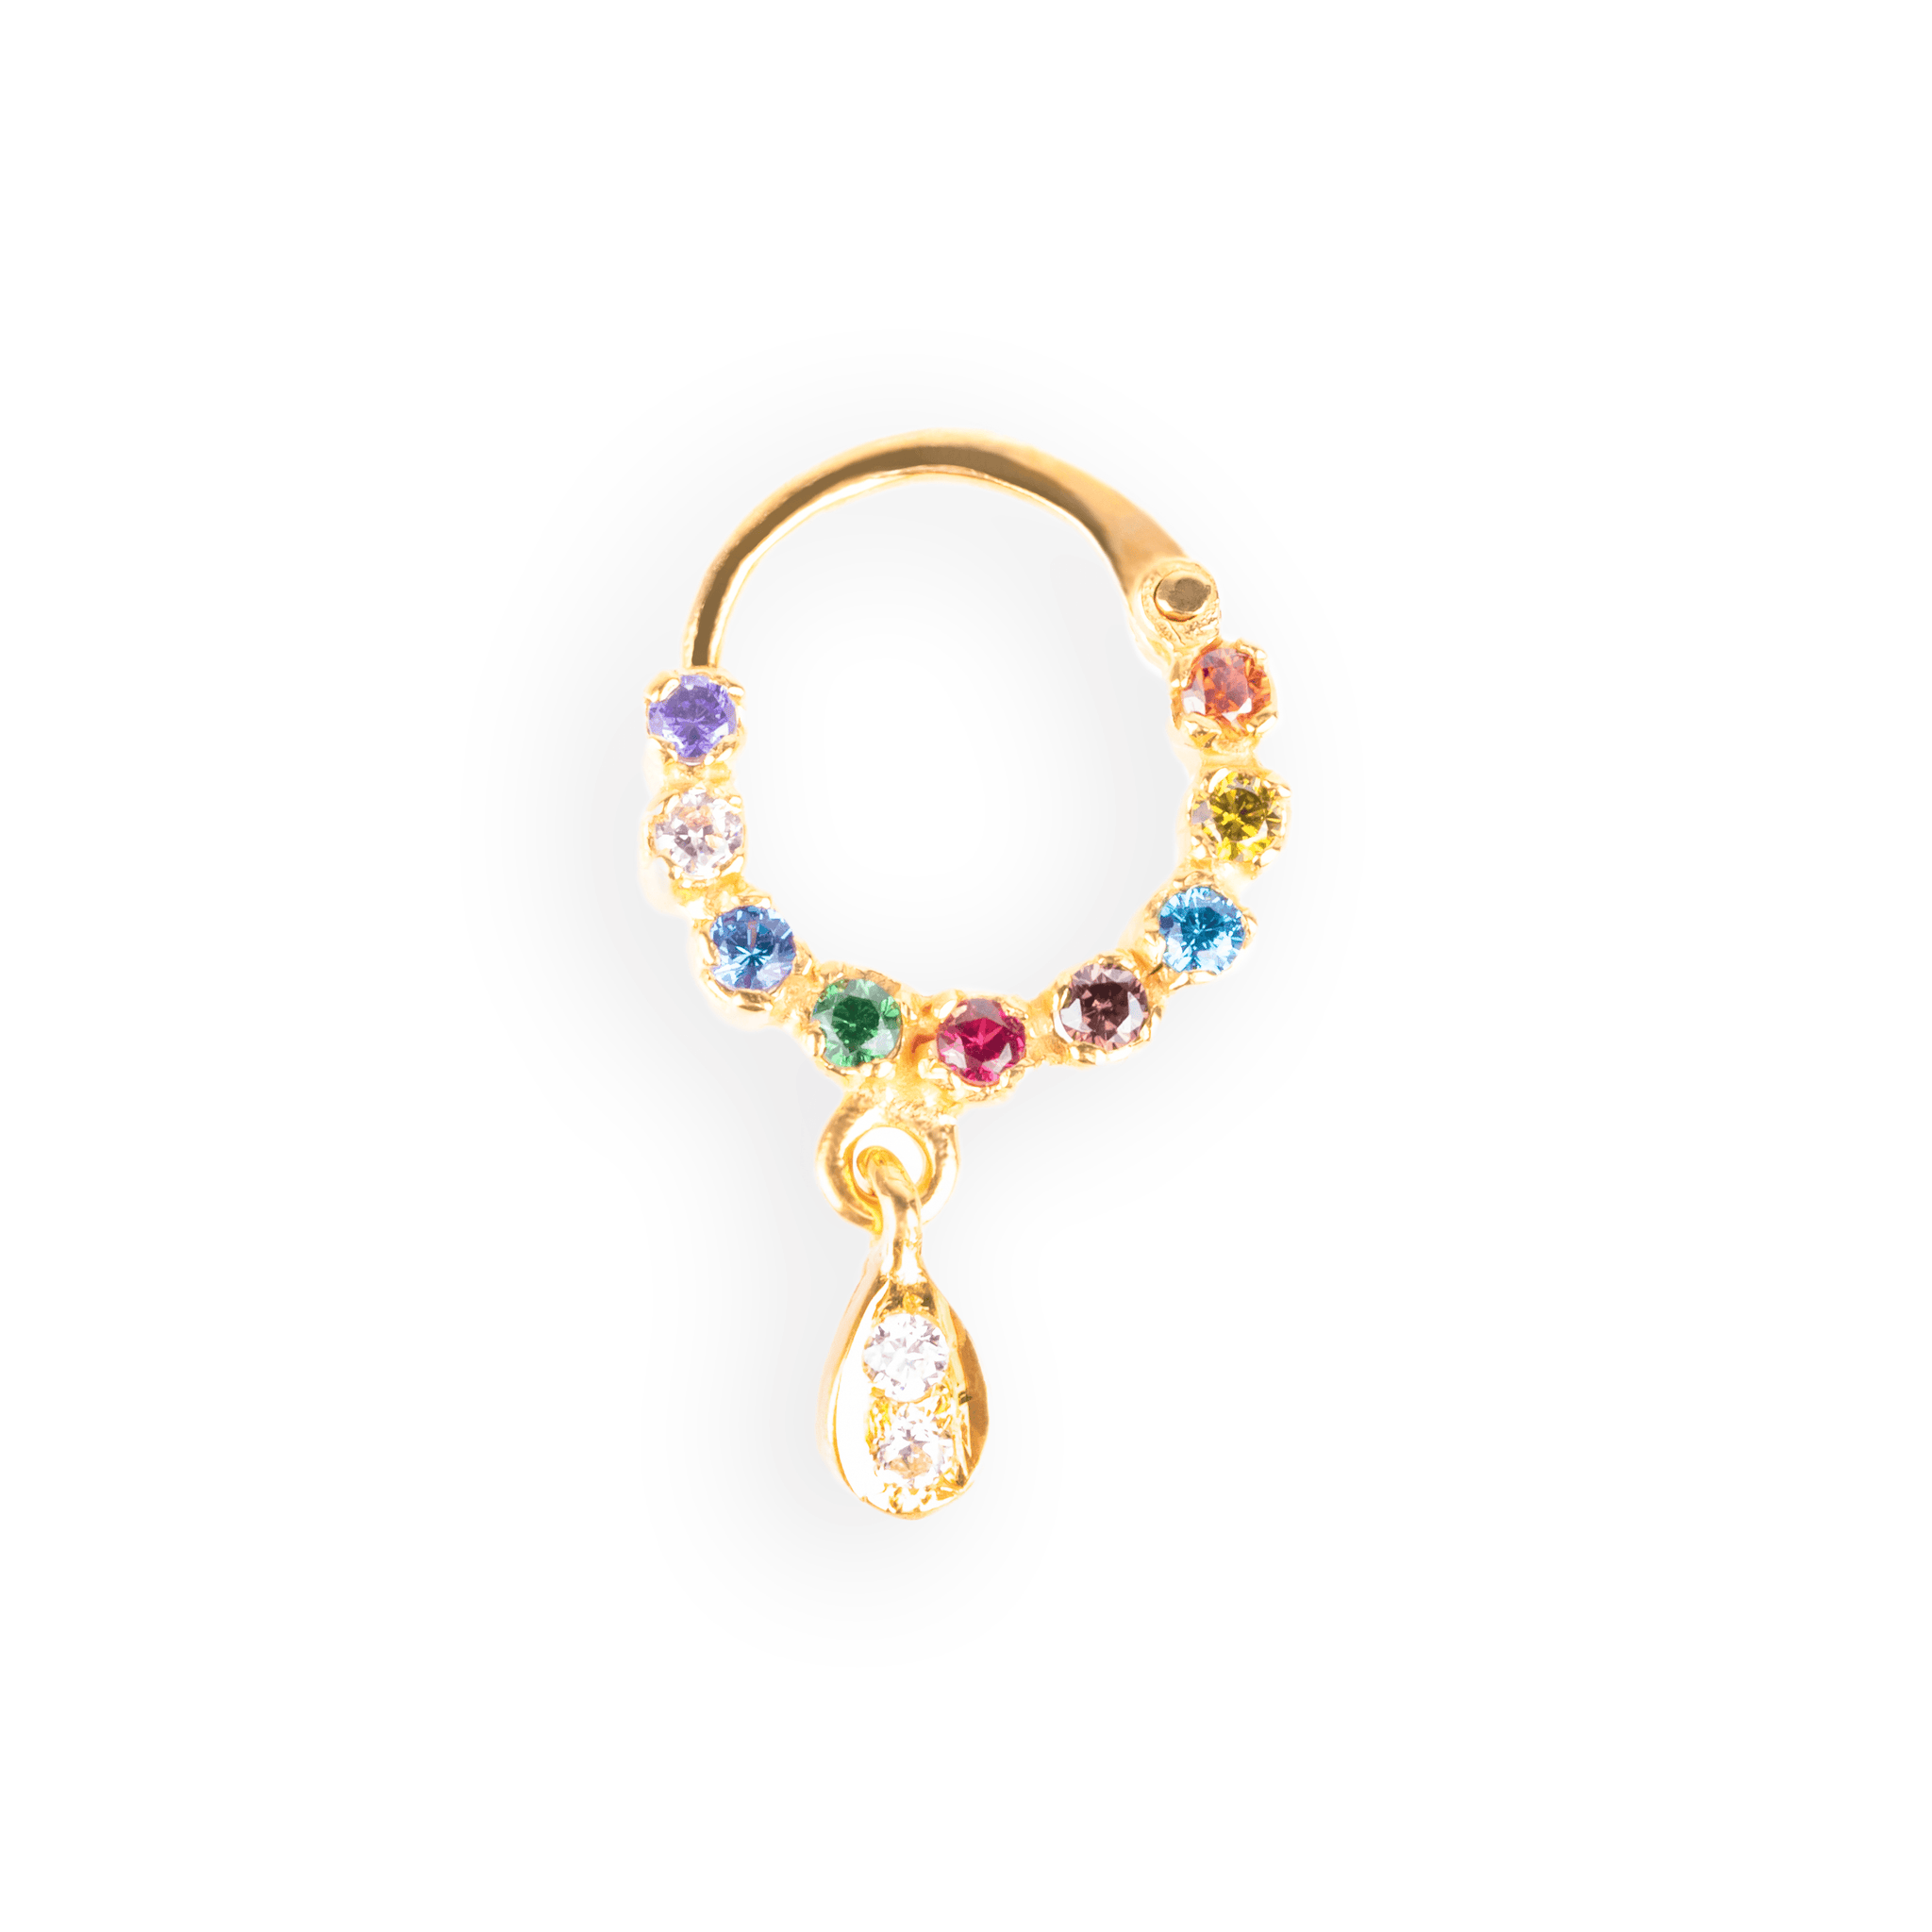 18ct Yellow Gold Nose Ring with Multi-Coloured Cubic Zirconias and a Drop NR-7586